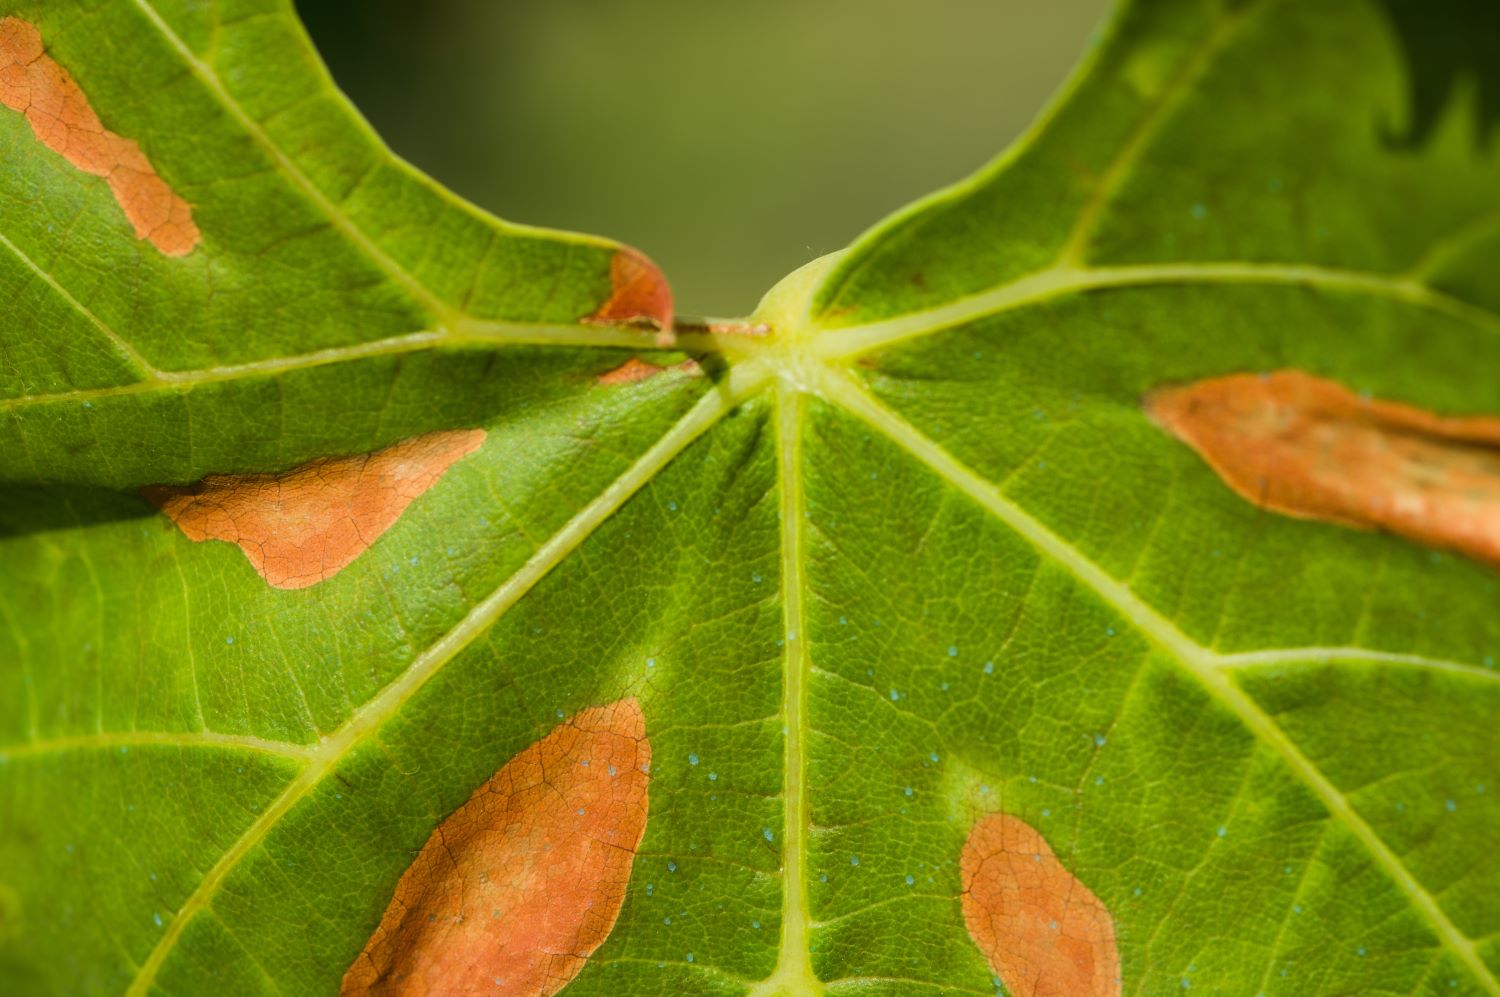 leaves infected with Xylella disease